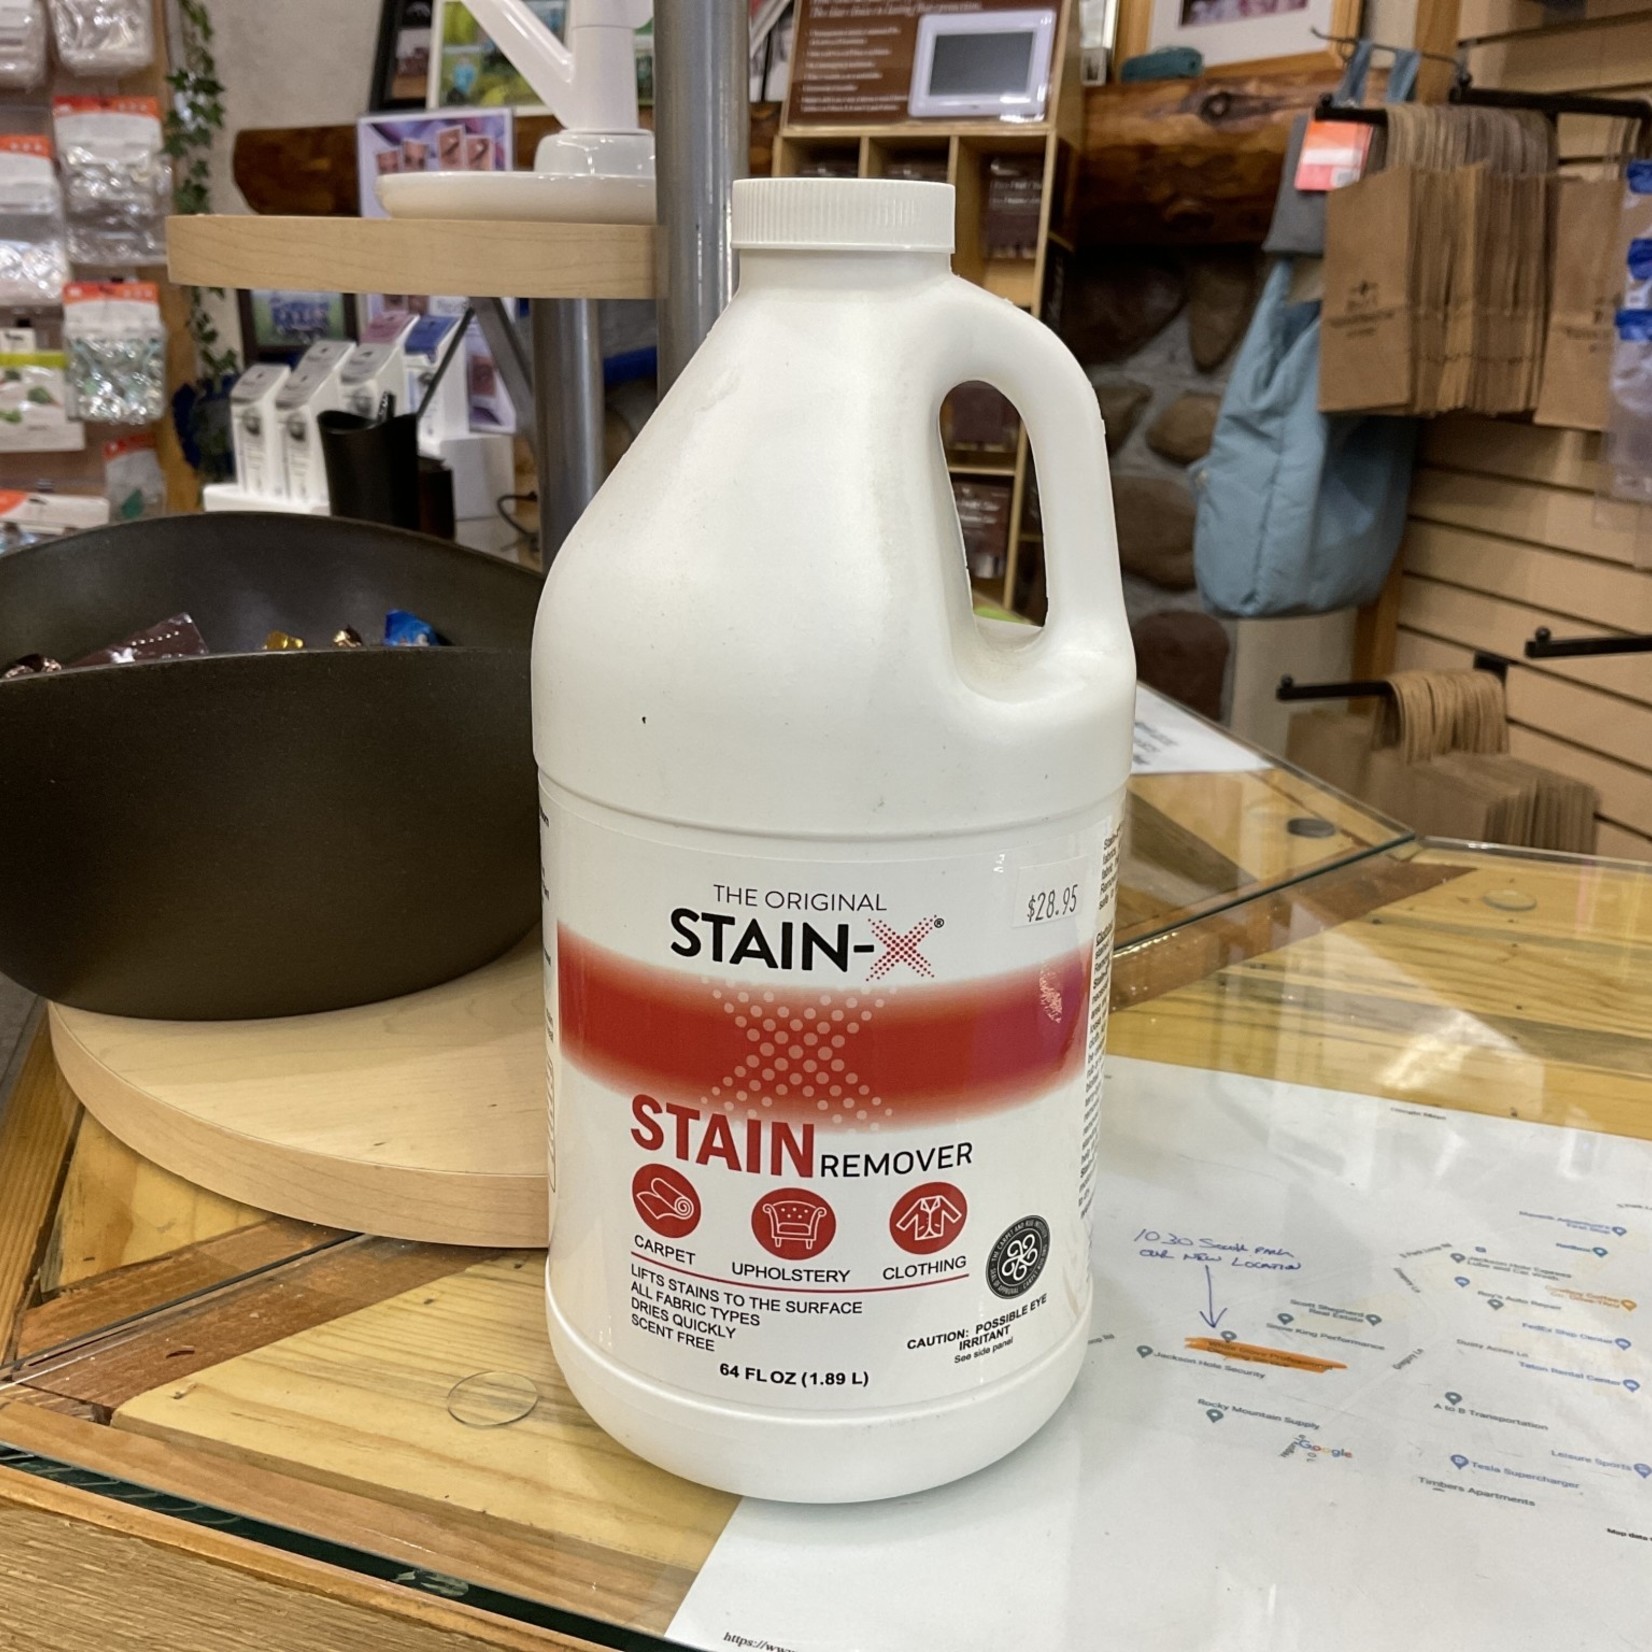 The original Stain -x Stain Remover 64 oz